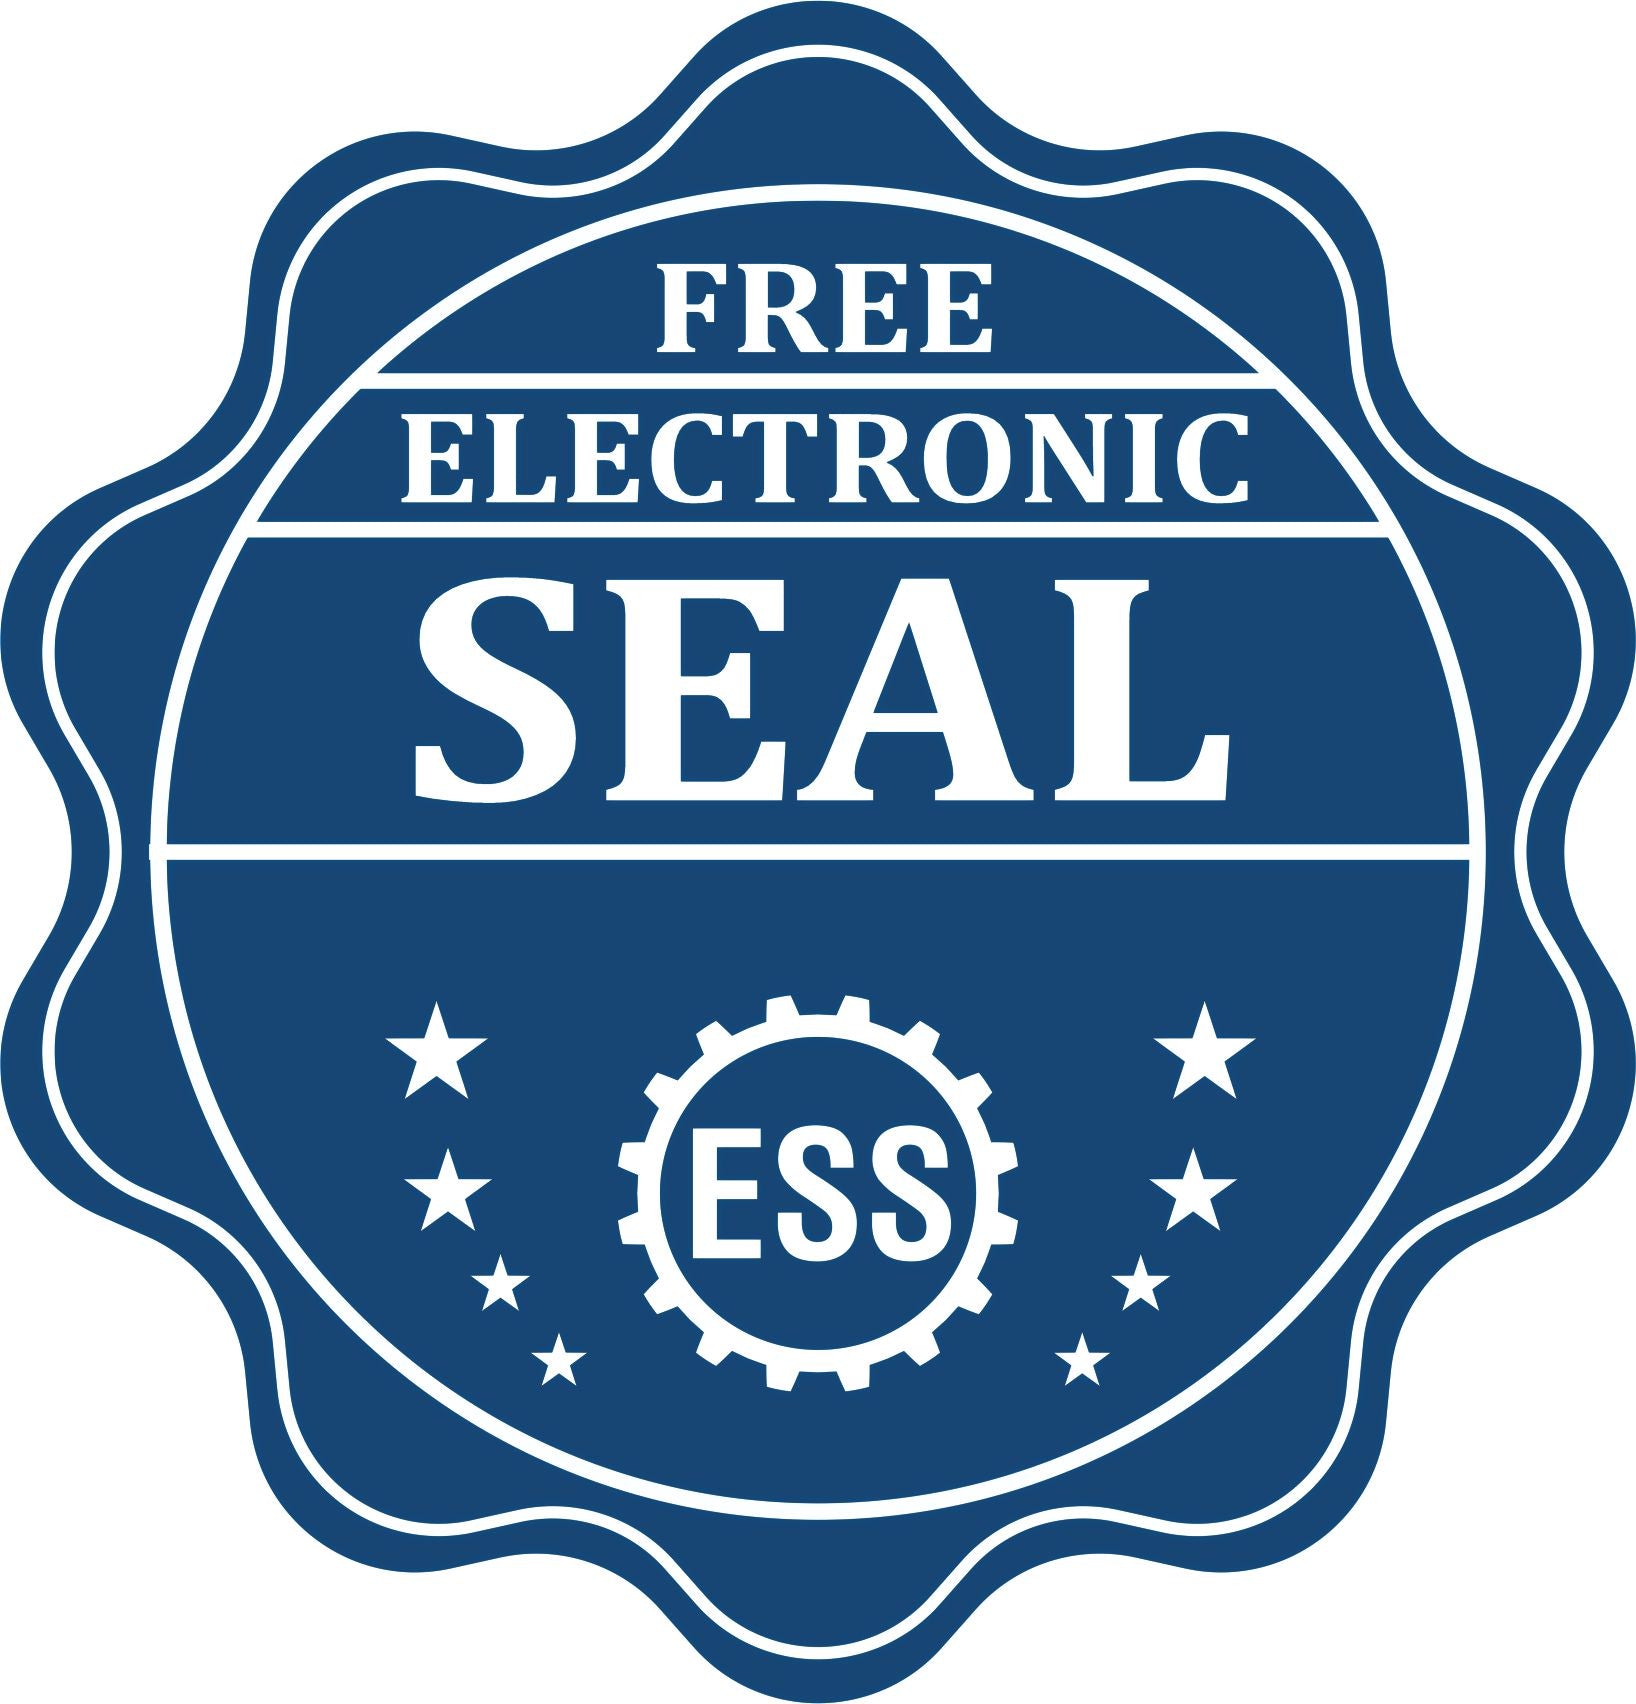 A badge showing a free electronic seal for the State of North Dakota Long Reach Architectural Embossing Seal with stars and the ESS gear on the emblem.